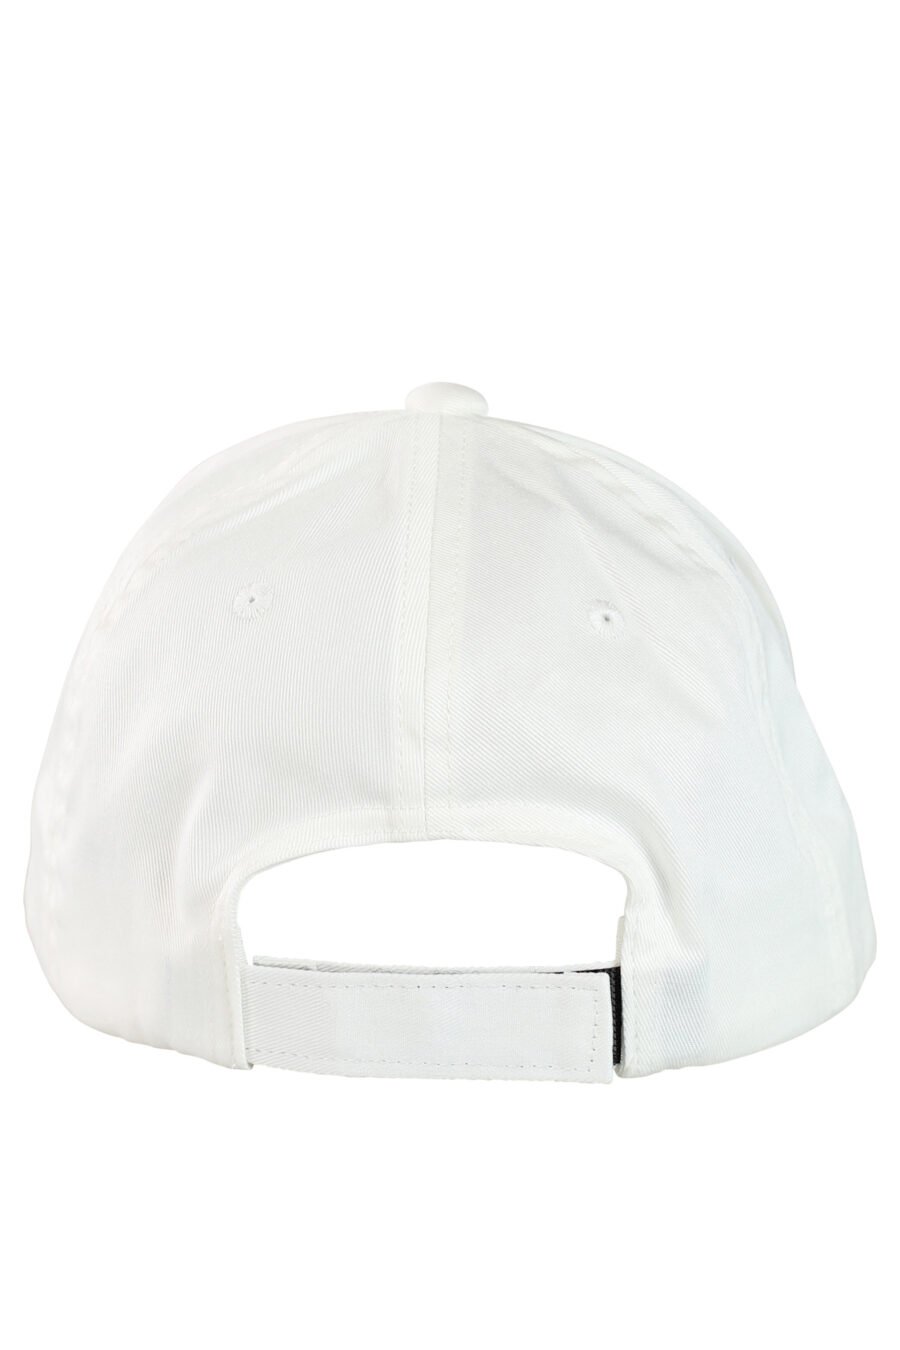 White cap with round logo and eagle - 8053616827693 2